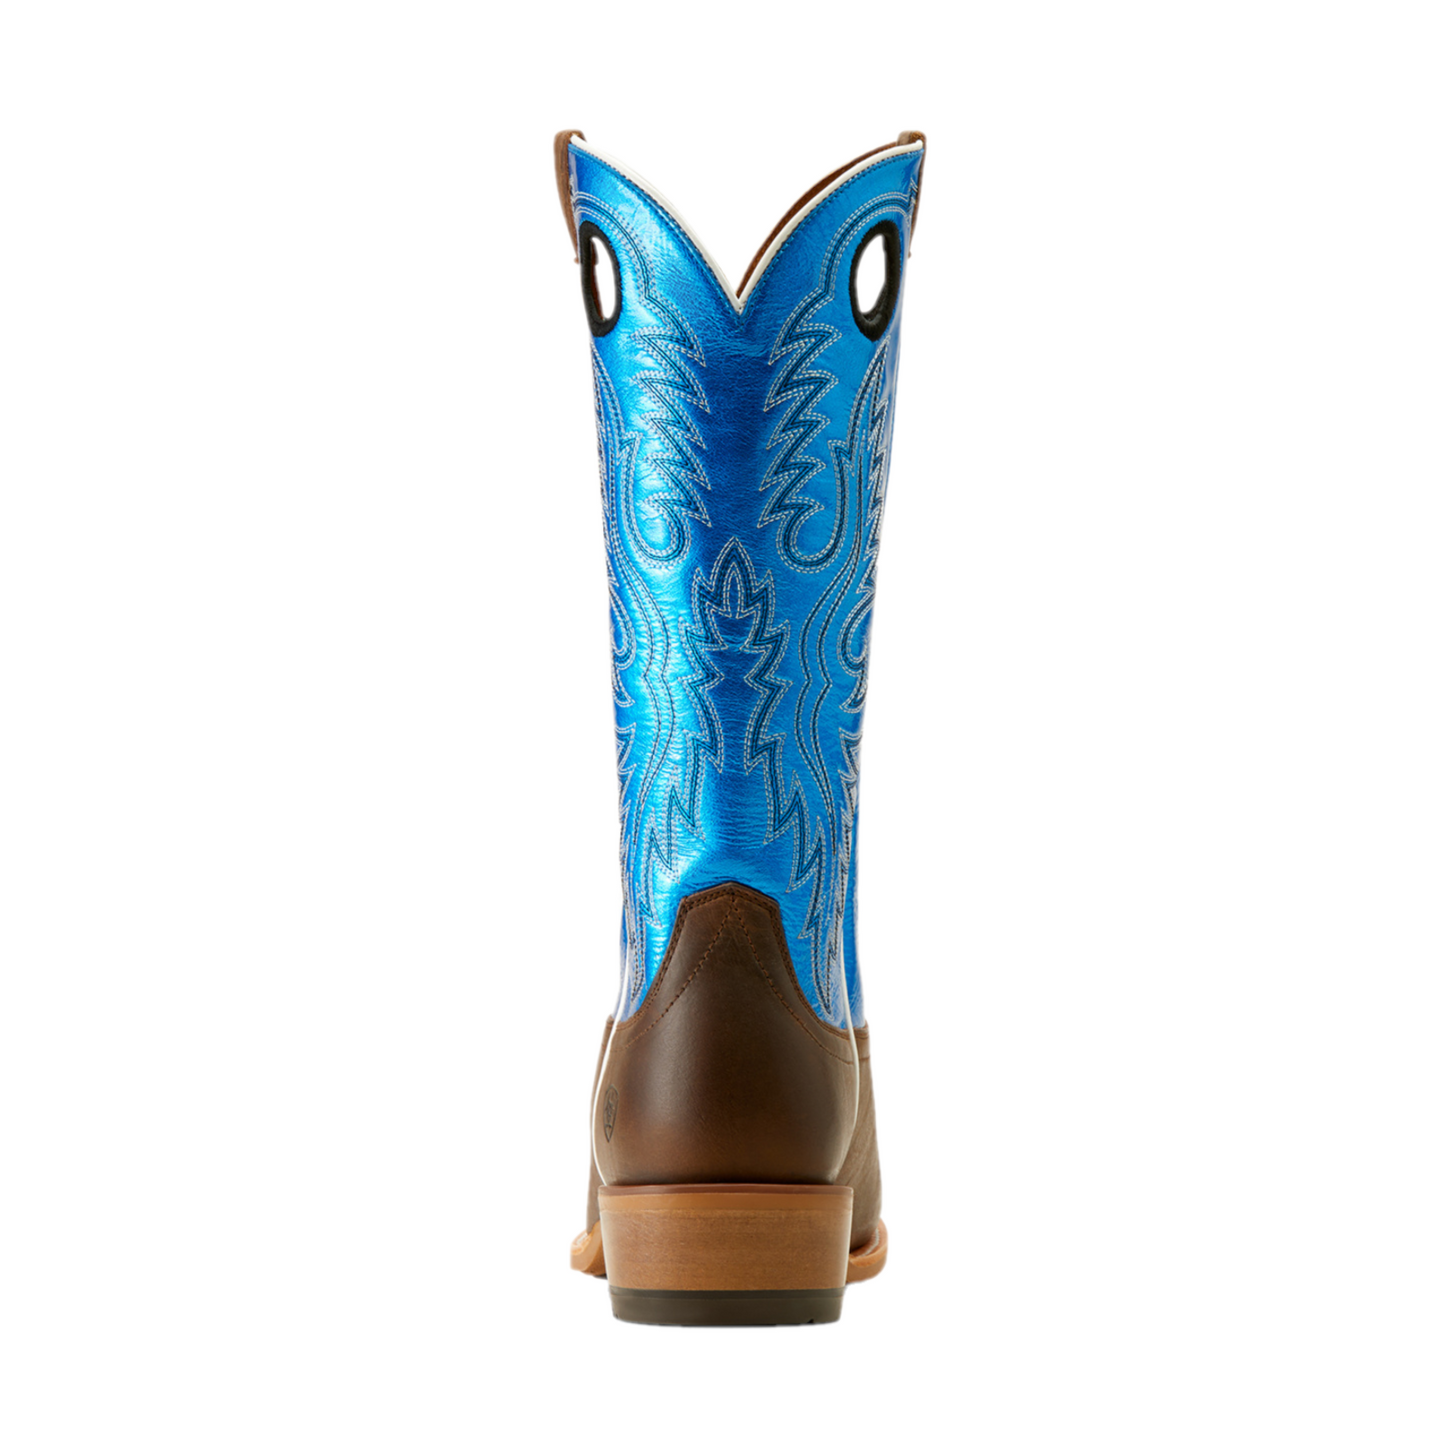 Ariat Men's Ringer Tobacco Toffee & Bright Blue Patent Western Boot 10051032